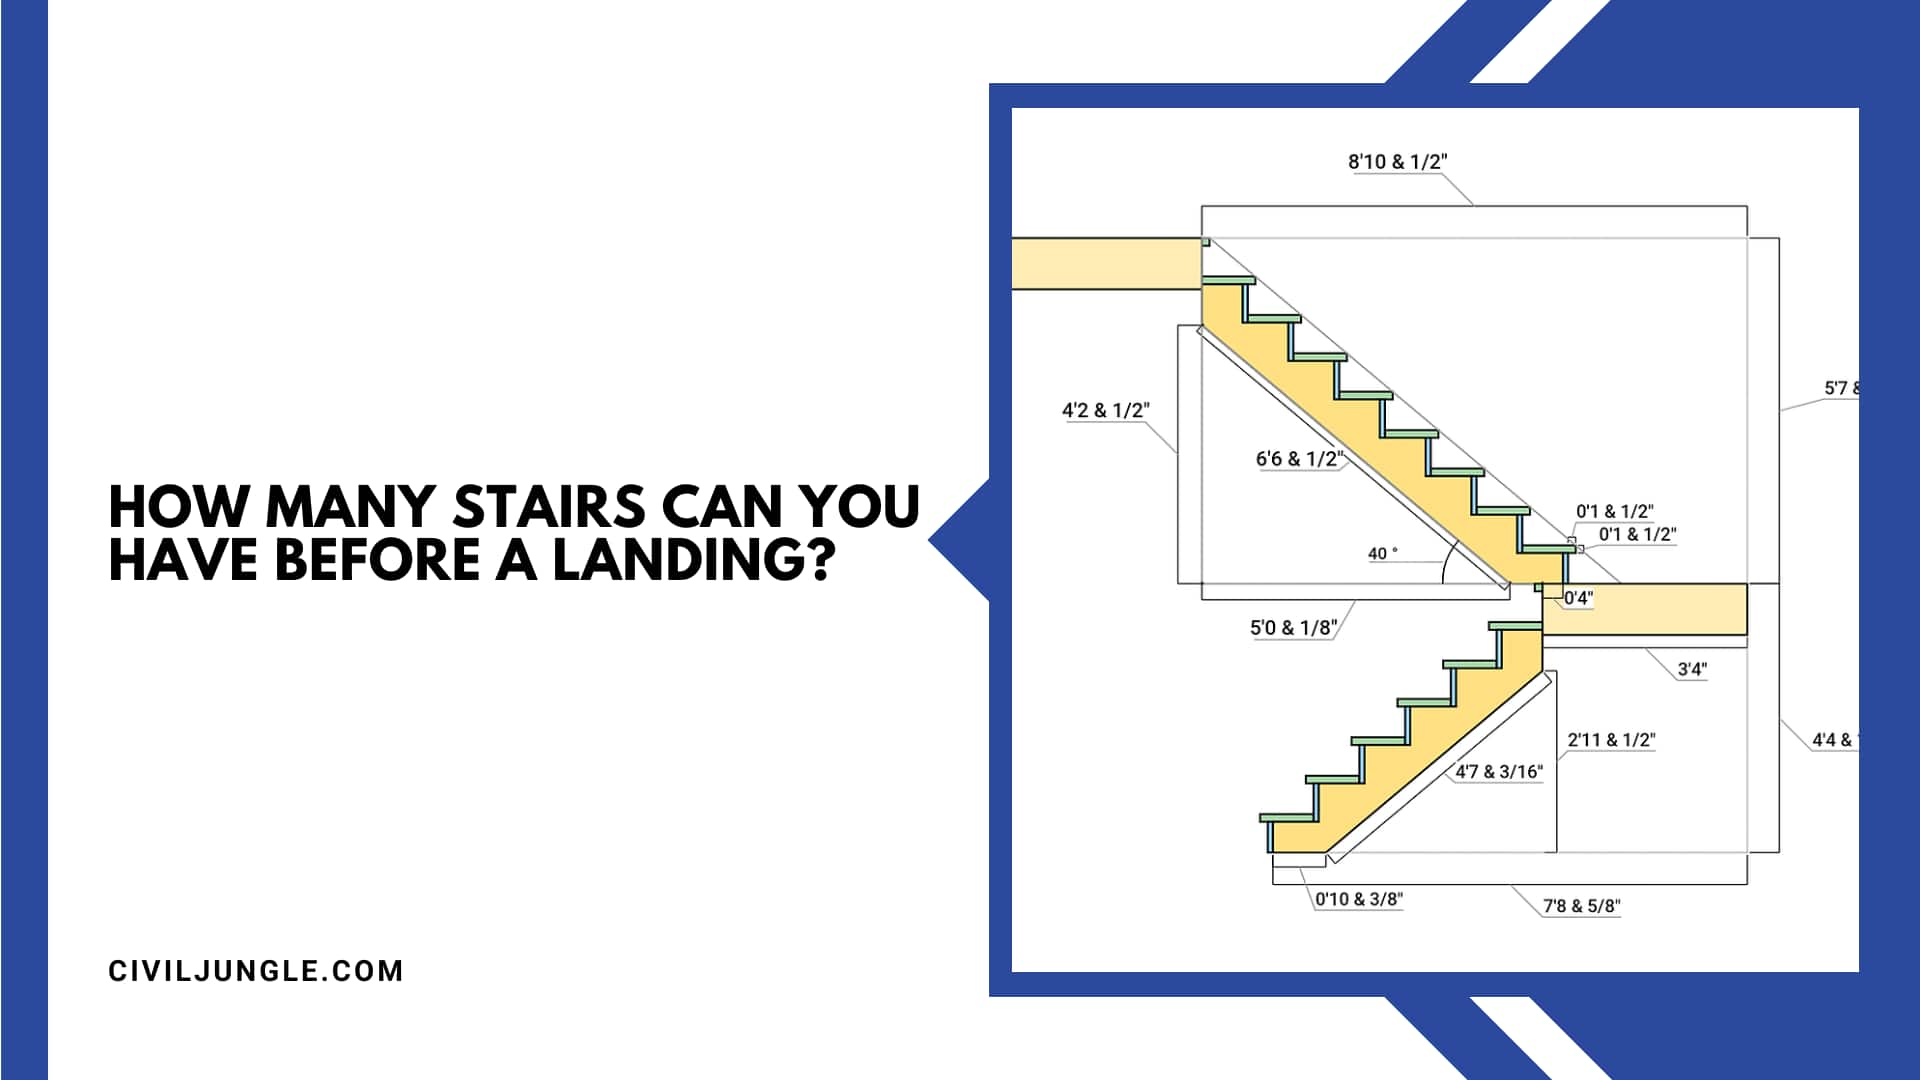 How Many Stairs Can You Have Before a Landing?